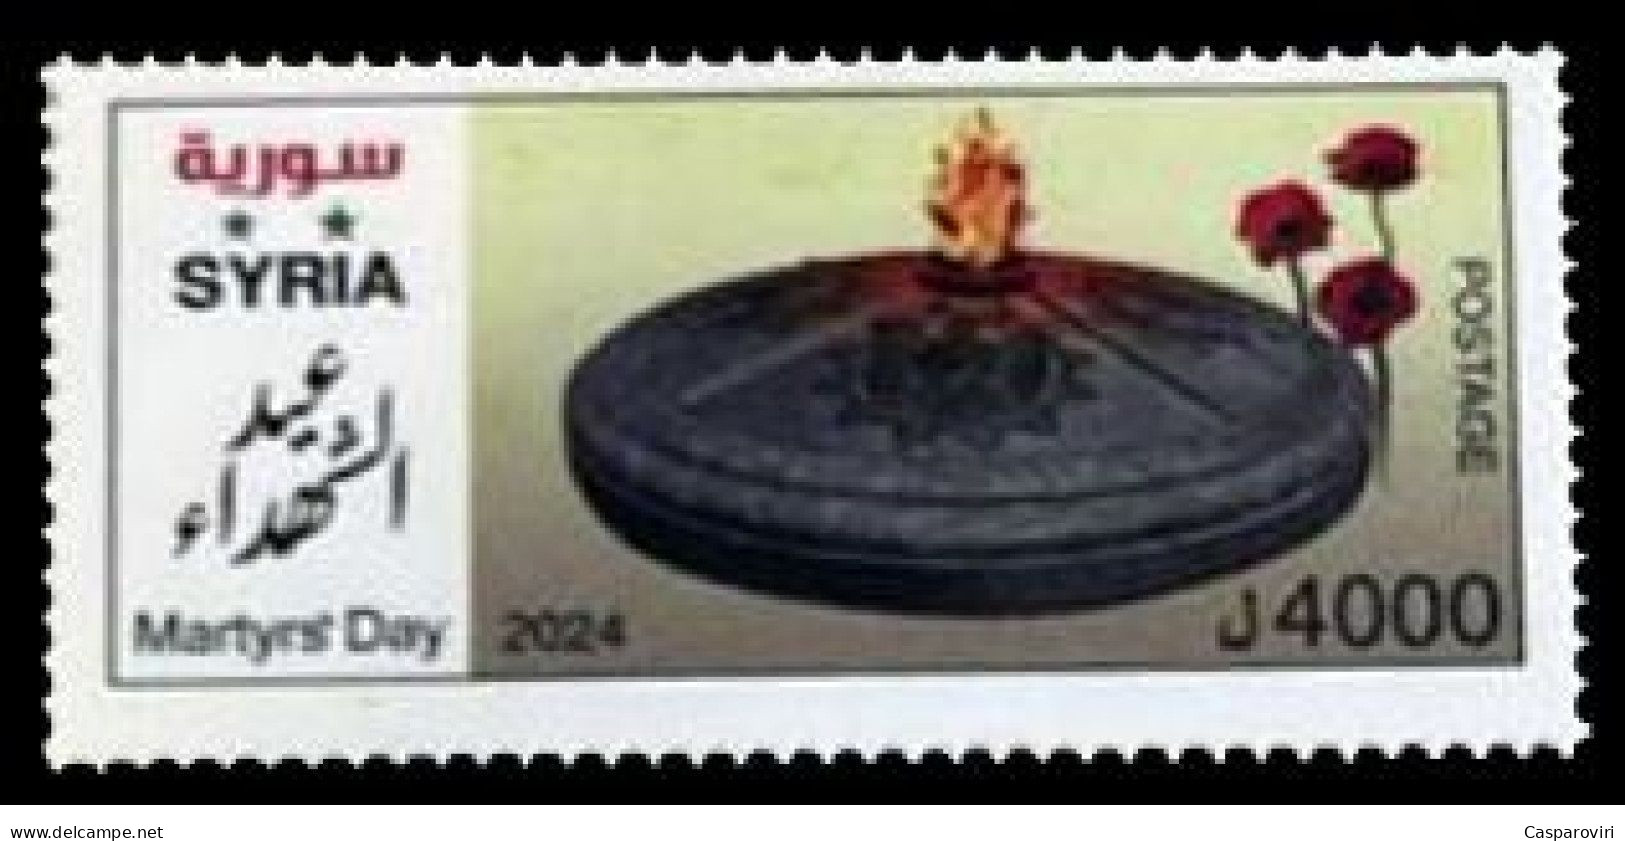 2024006; Syria; 2024; Martyrs' Day Stamp; MNH** - Syria